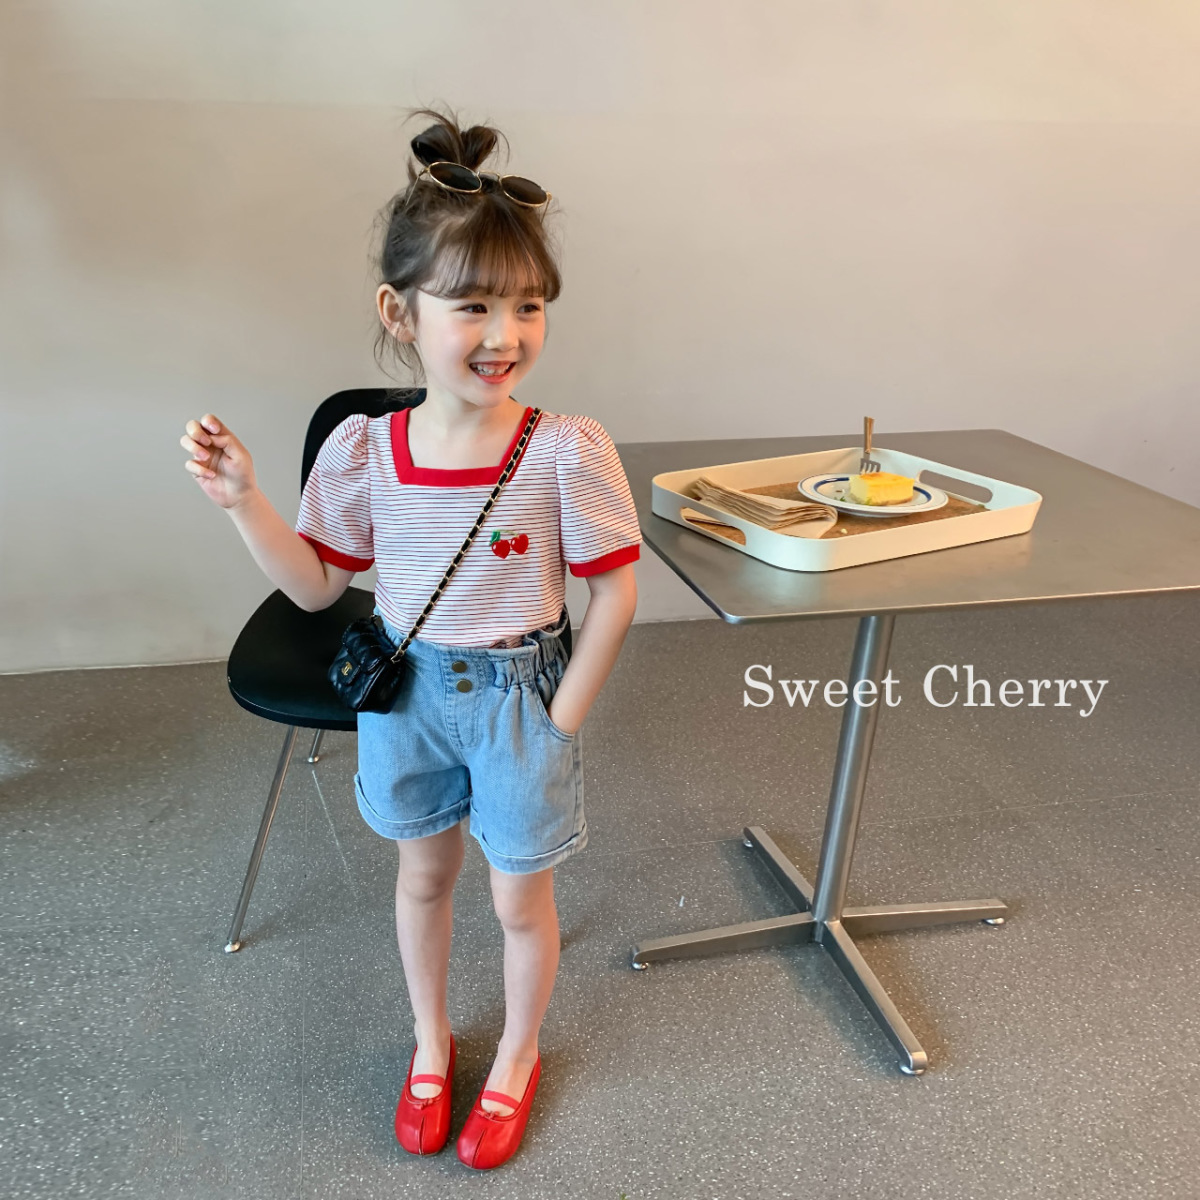 Girls striped t-shirt 2022 summer new children's clothing foreign style cherry embroidery children's pure cotton square collar short-sleeved top